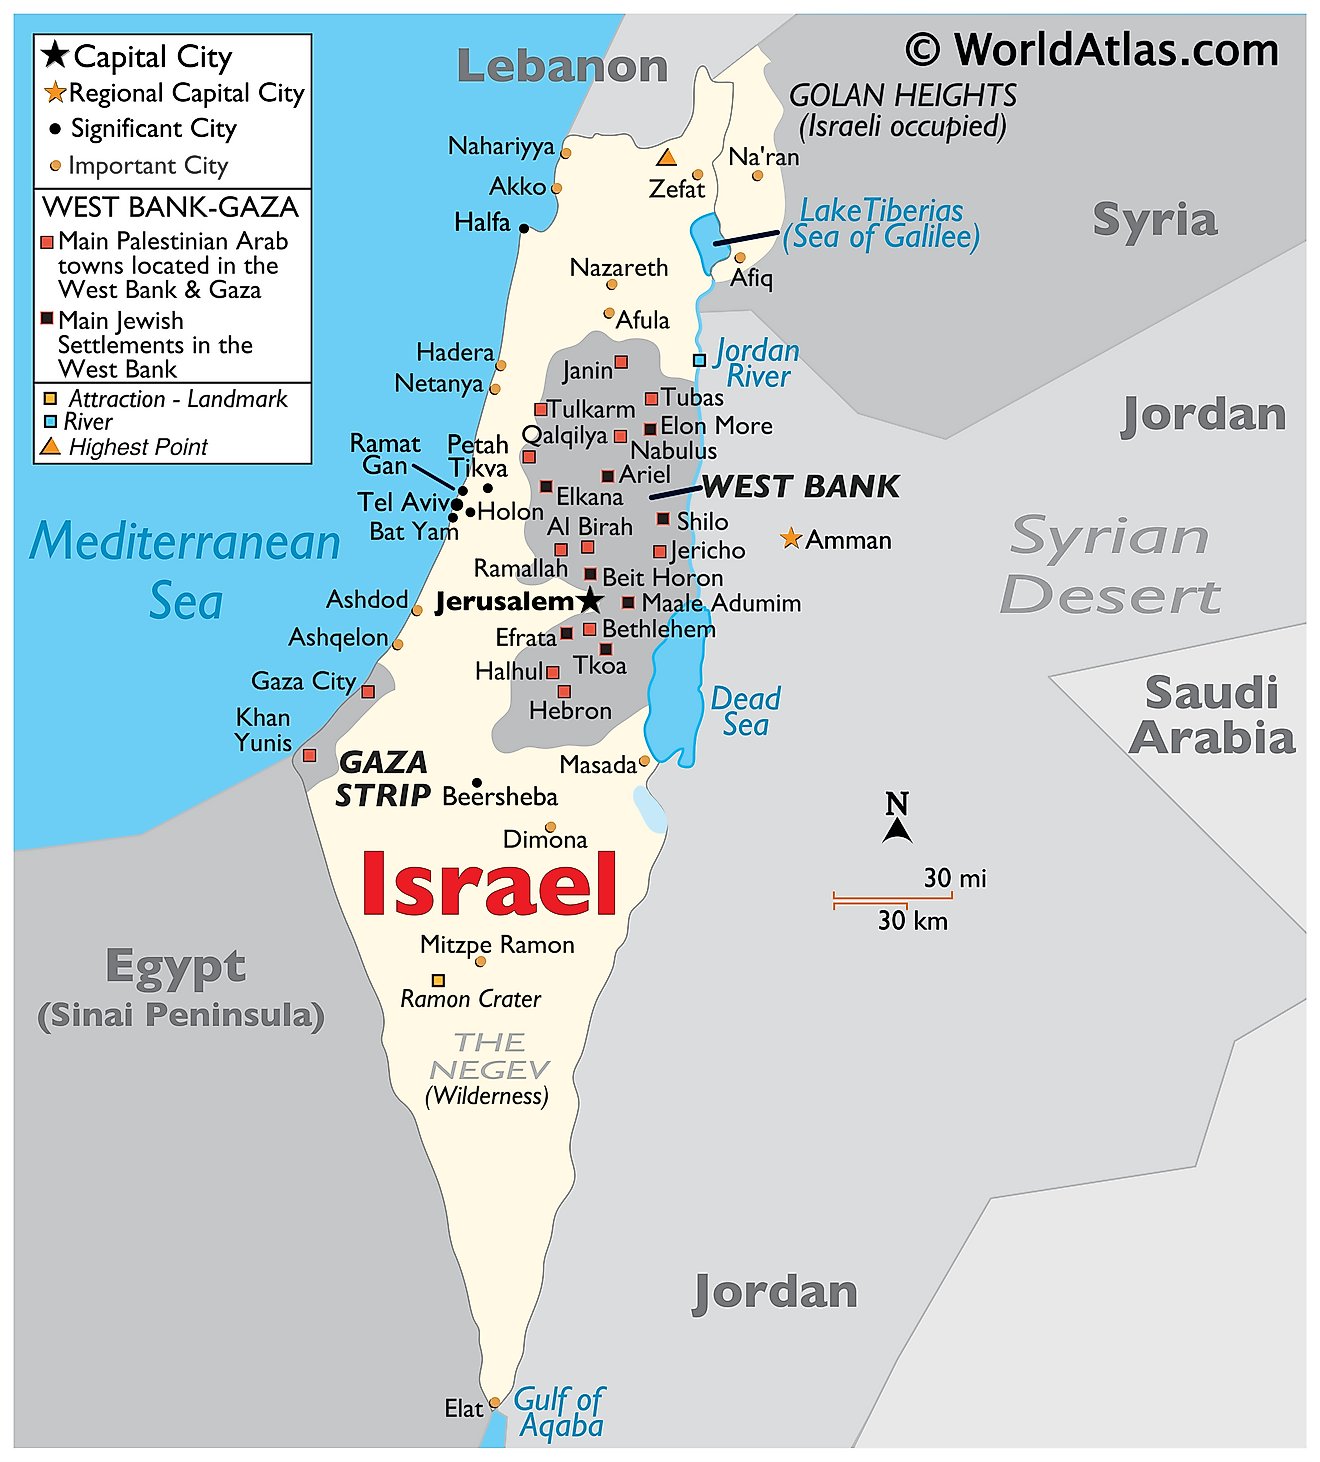 Physical Map of Israel showing bordering countries, relief, highest point, Jordan River, Dead Sea, important cities, etc.